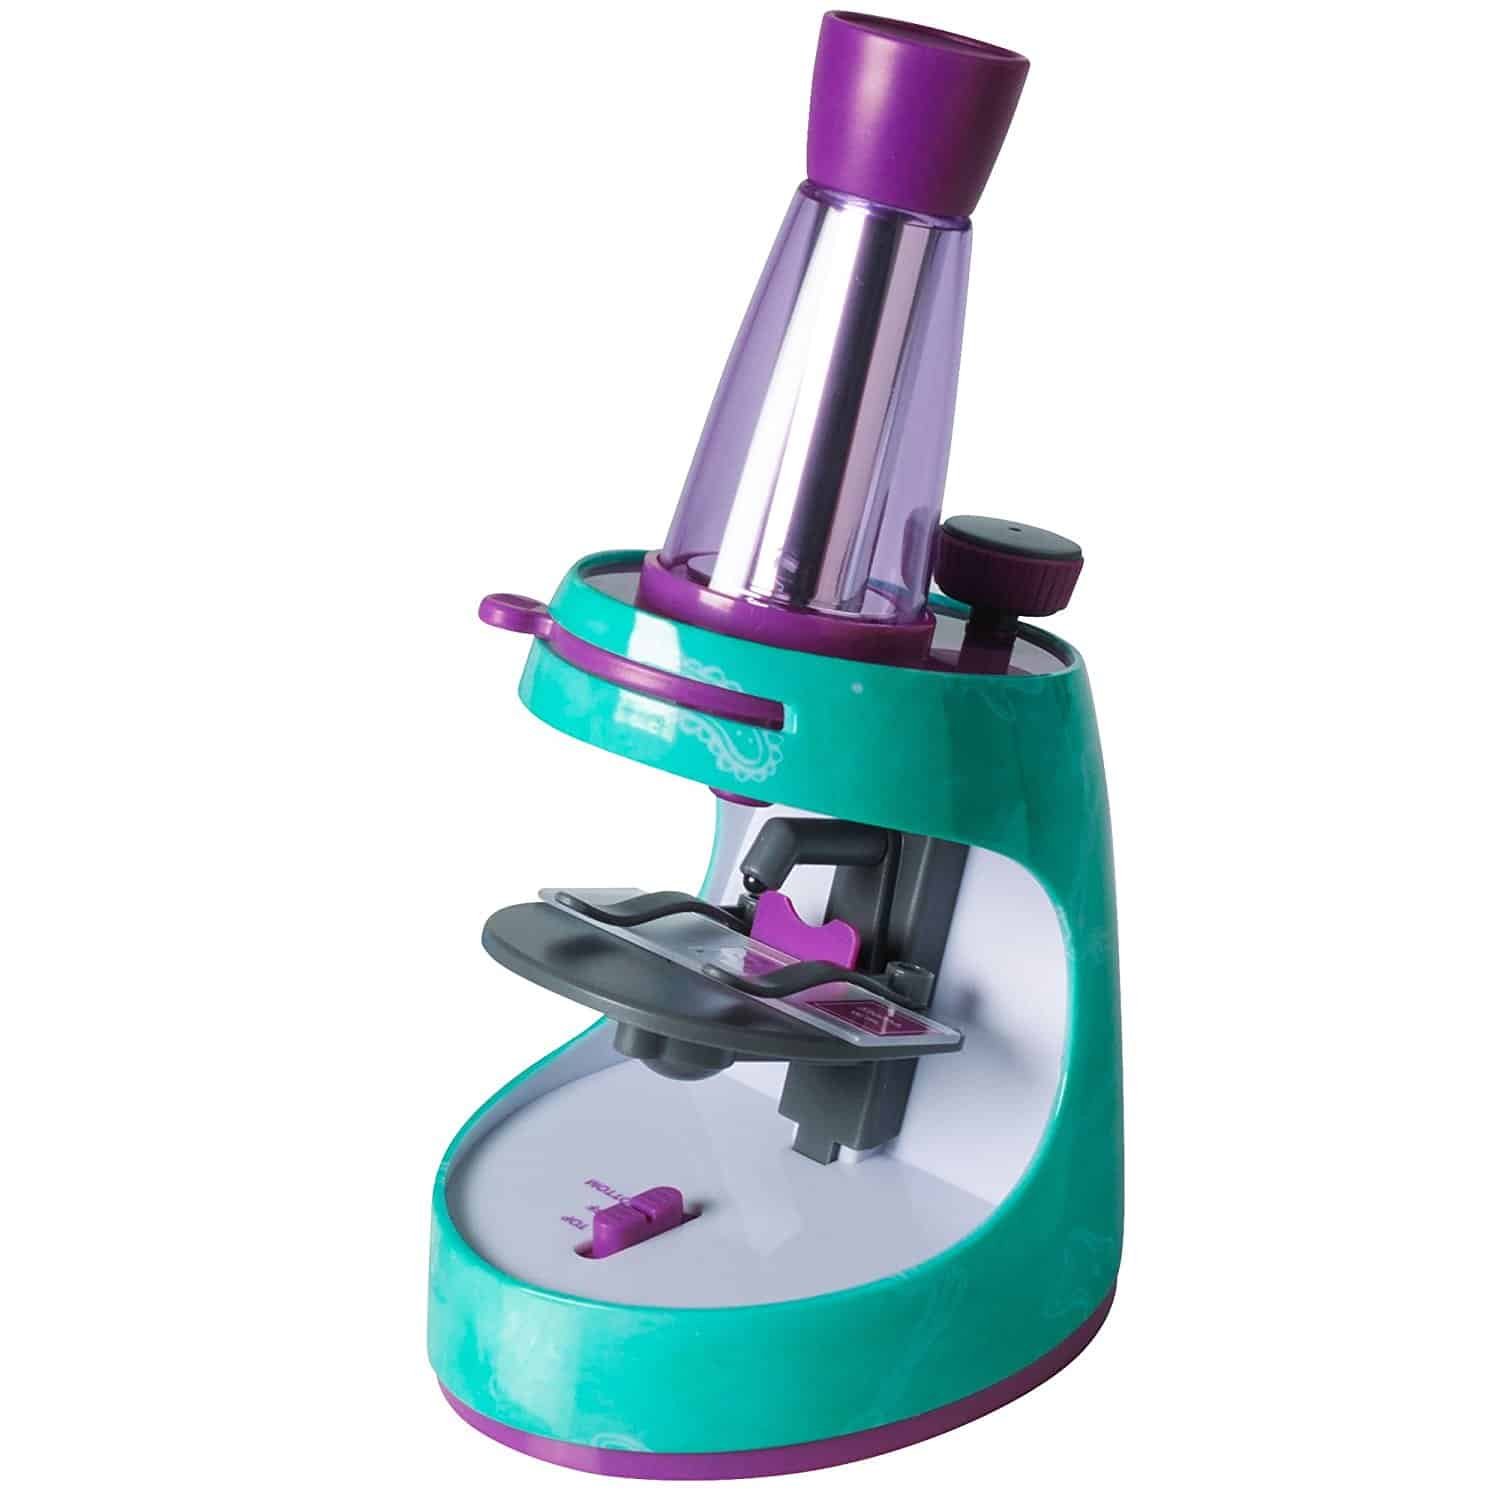 DEAL ALERT: Educational Insights Nancy B’s Science Club Microscope and Activity Journal 50% off!